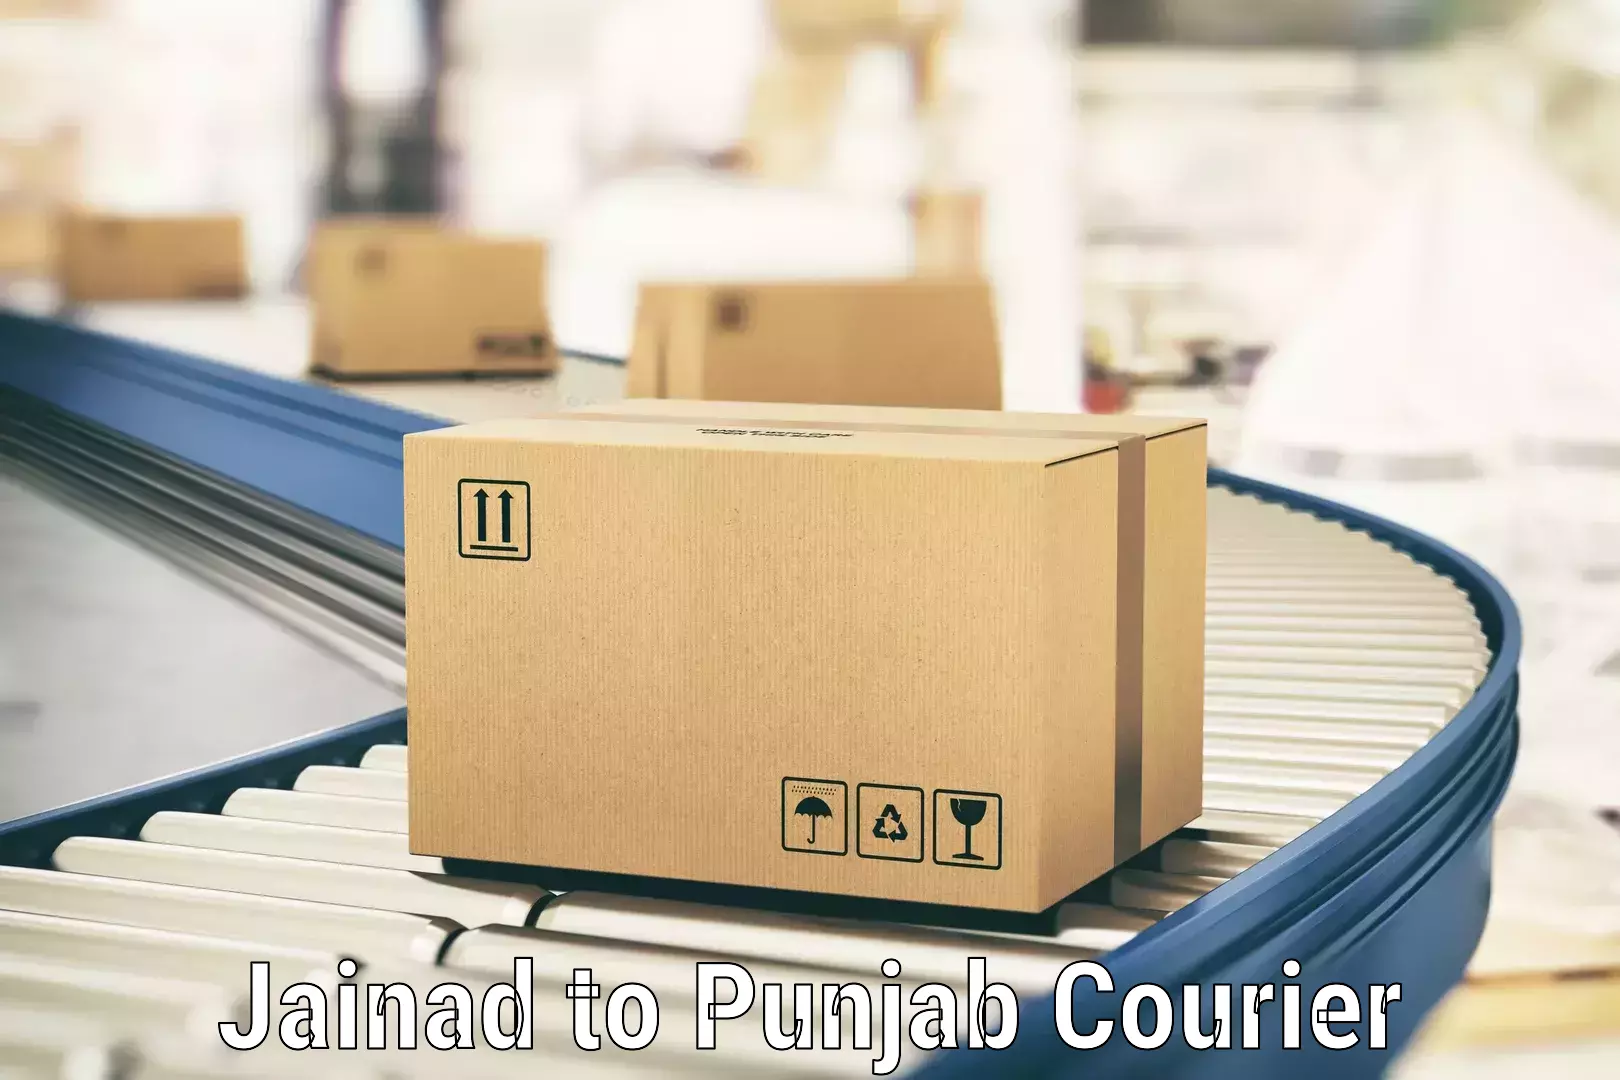 Personal courier services Jainad to Mandi Gobindgarh